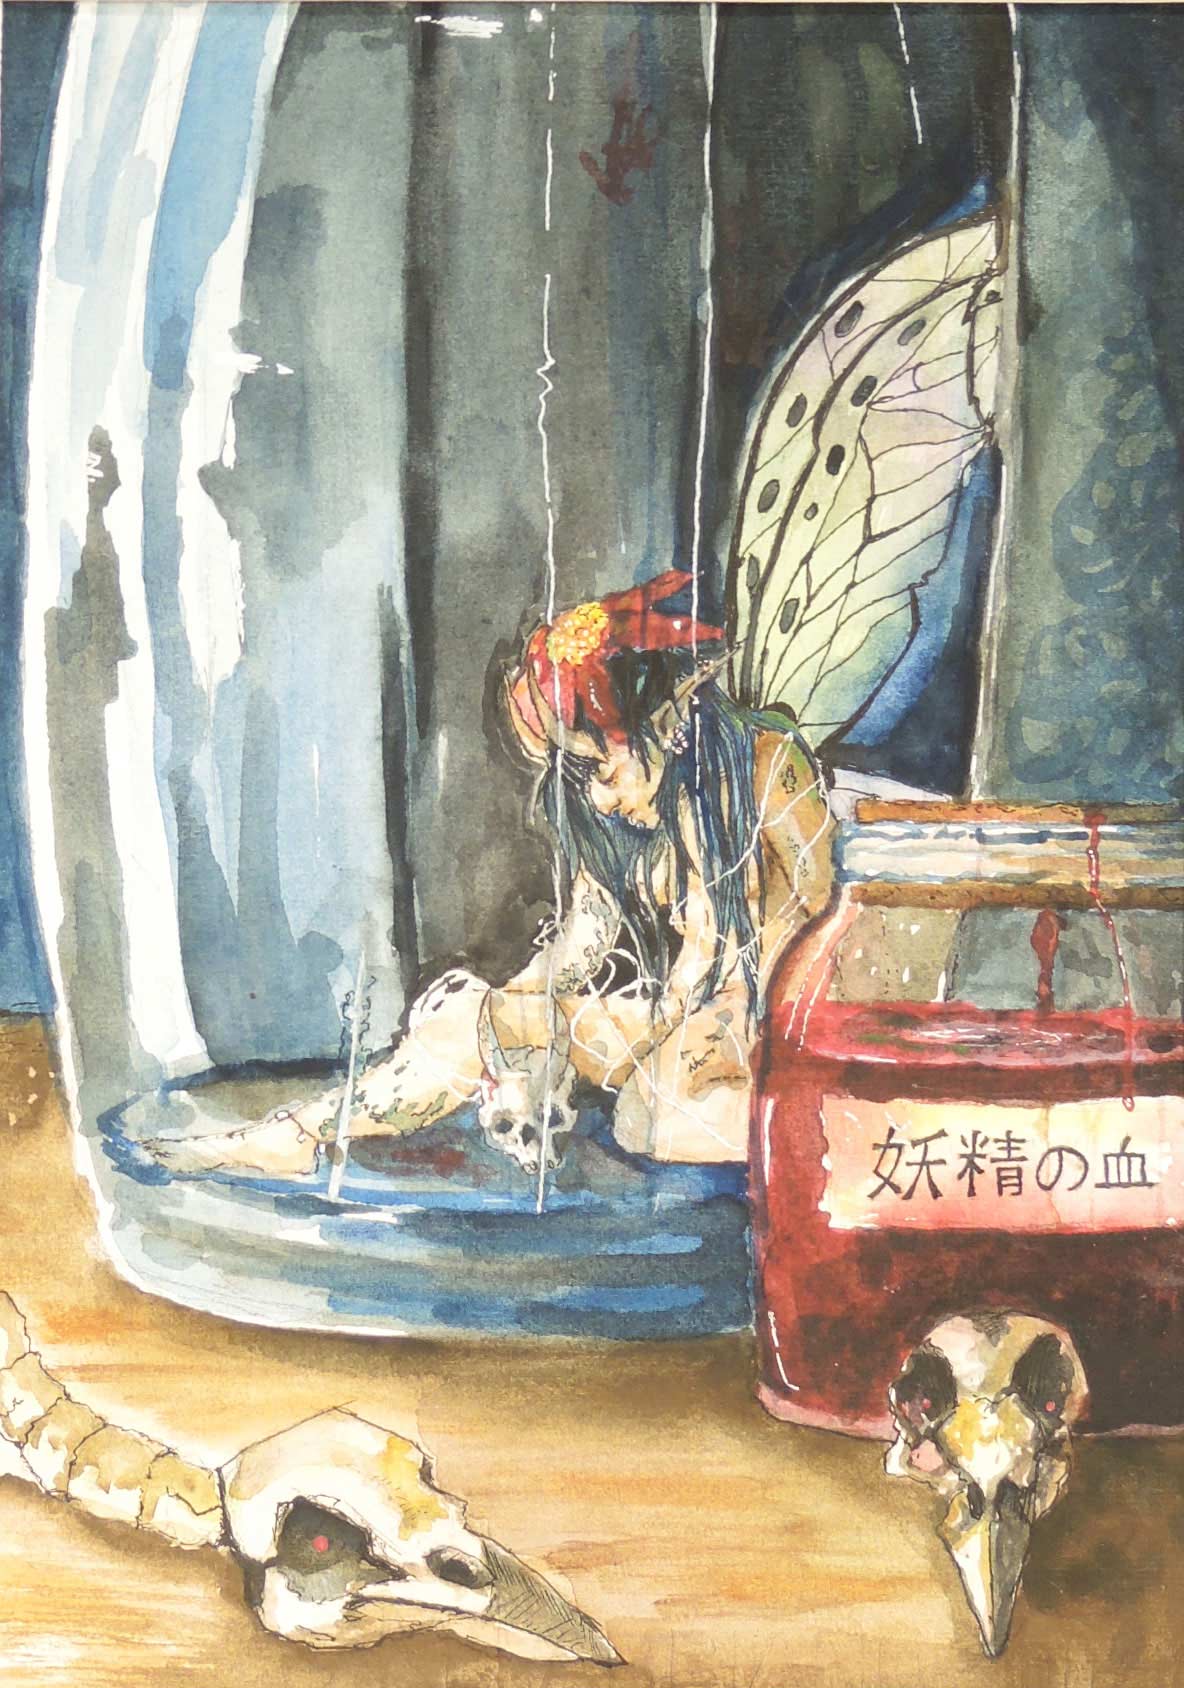 A painting by Nina Vazquez of two jars, one containing a small winged person